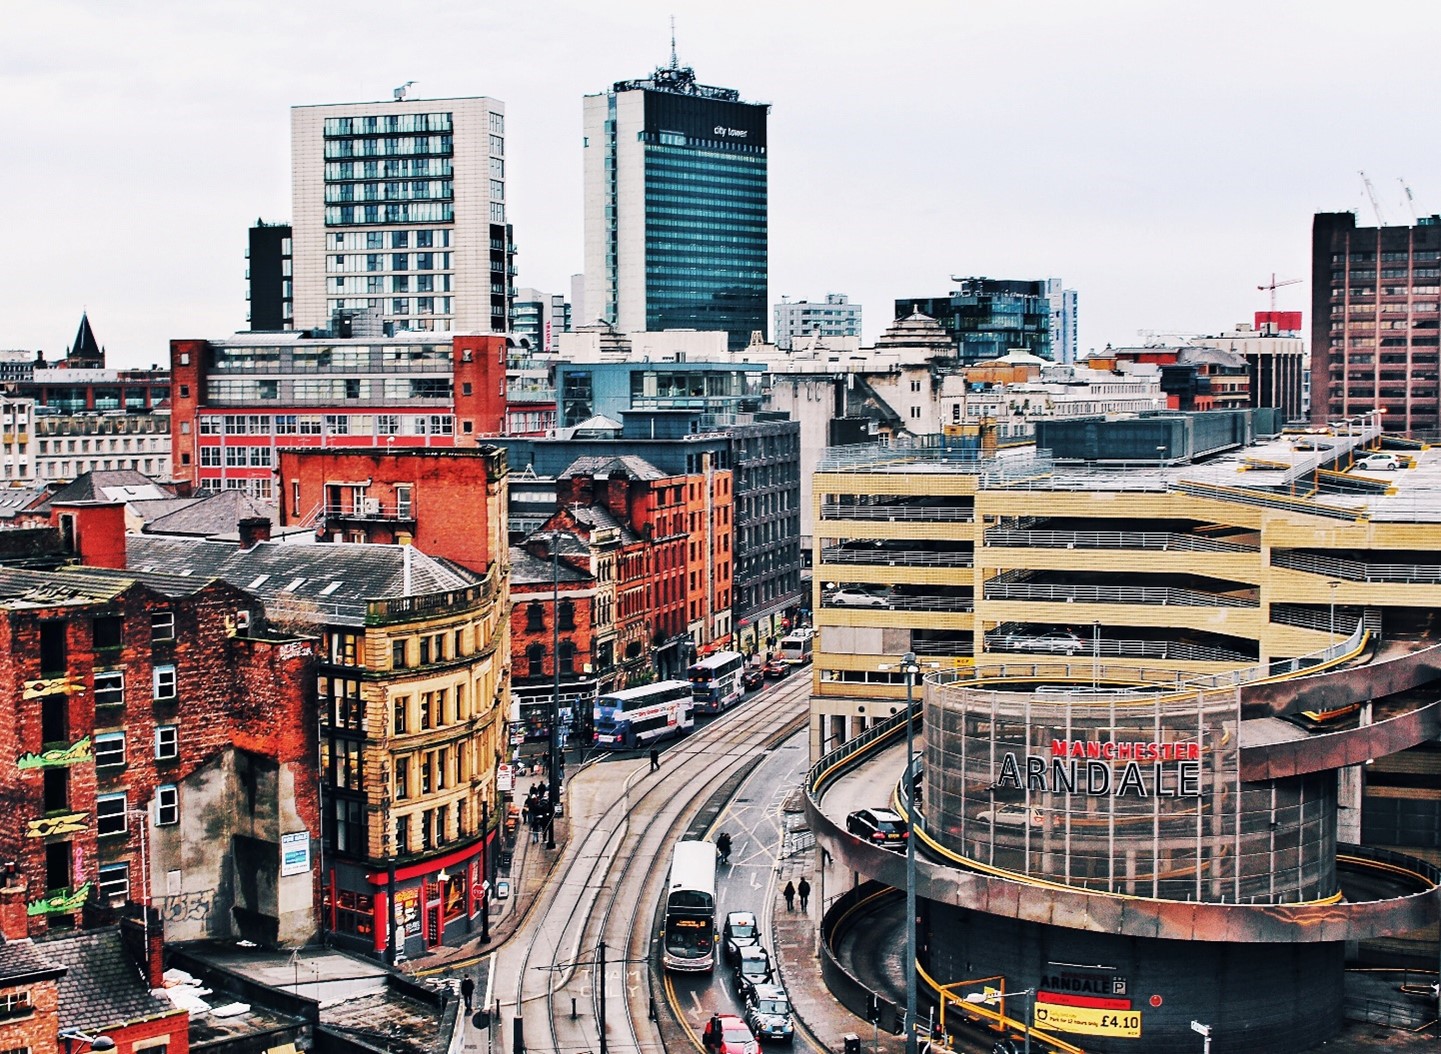 Image description: A view showing busy Manchester city streets taken from above. Photo by Jeremy Bishop on Unsplash